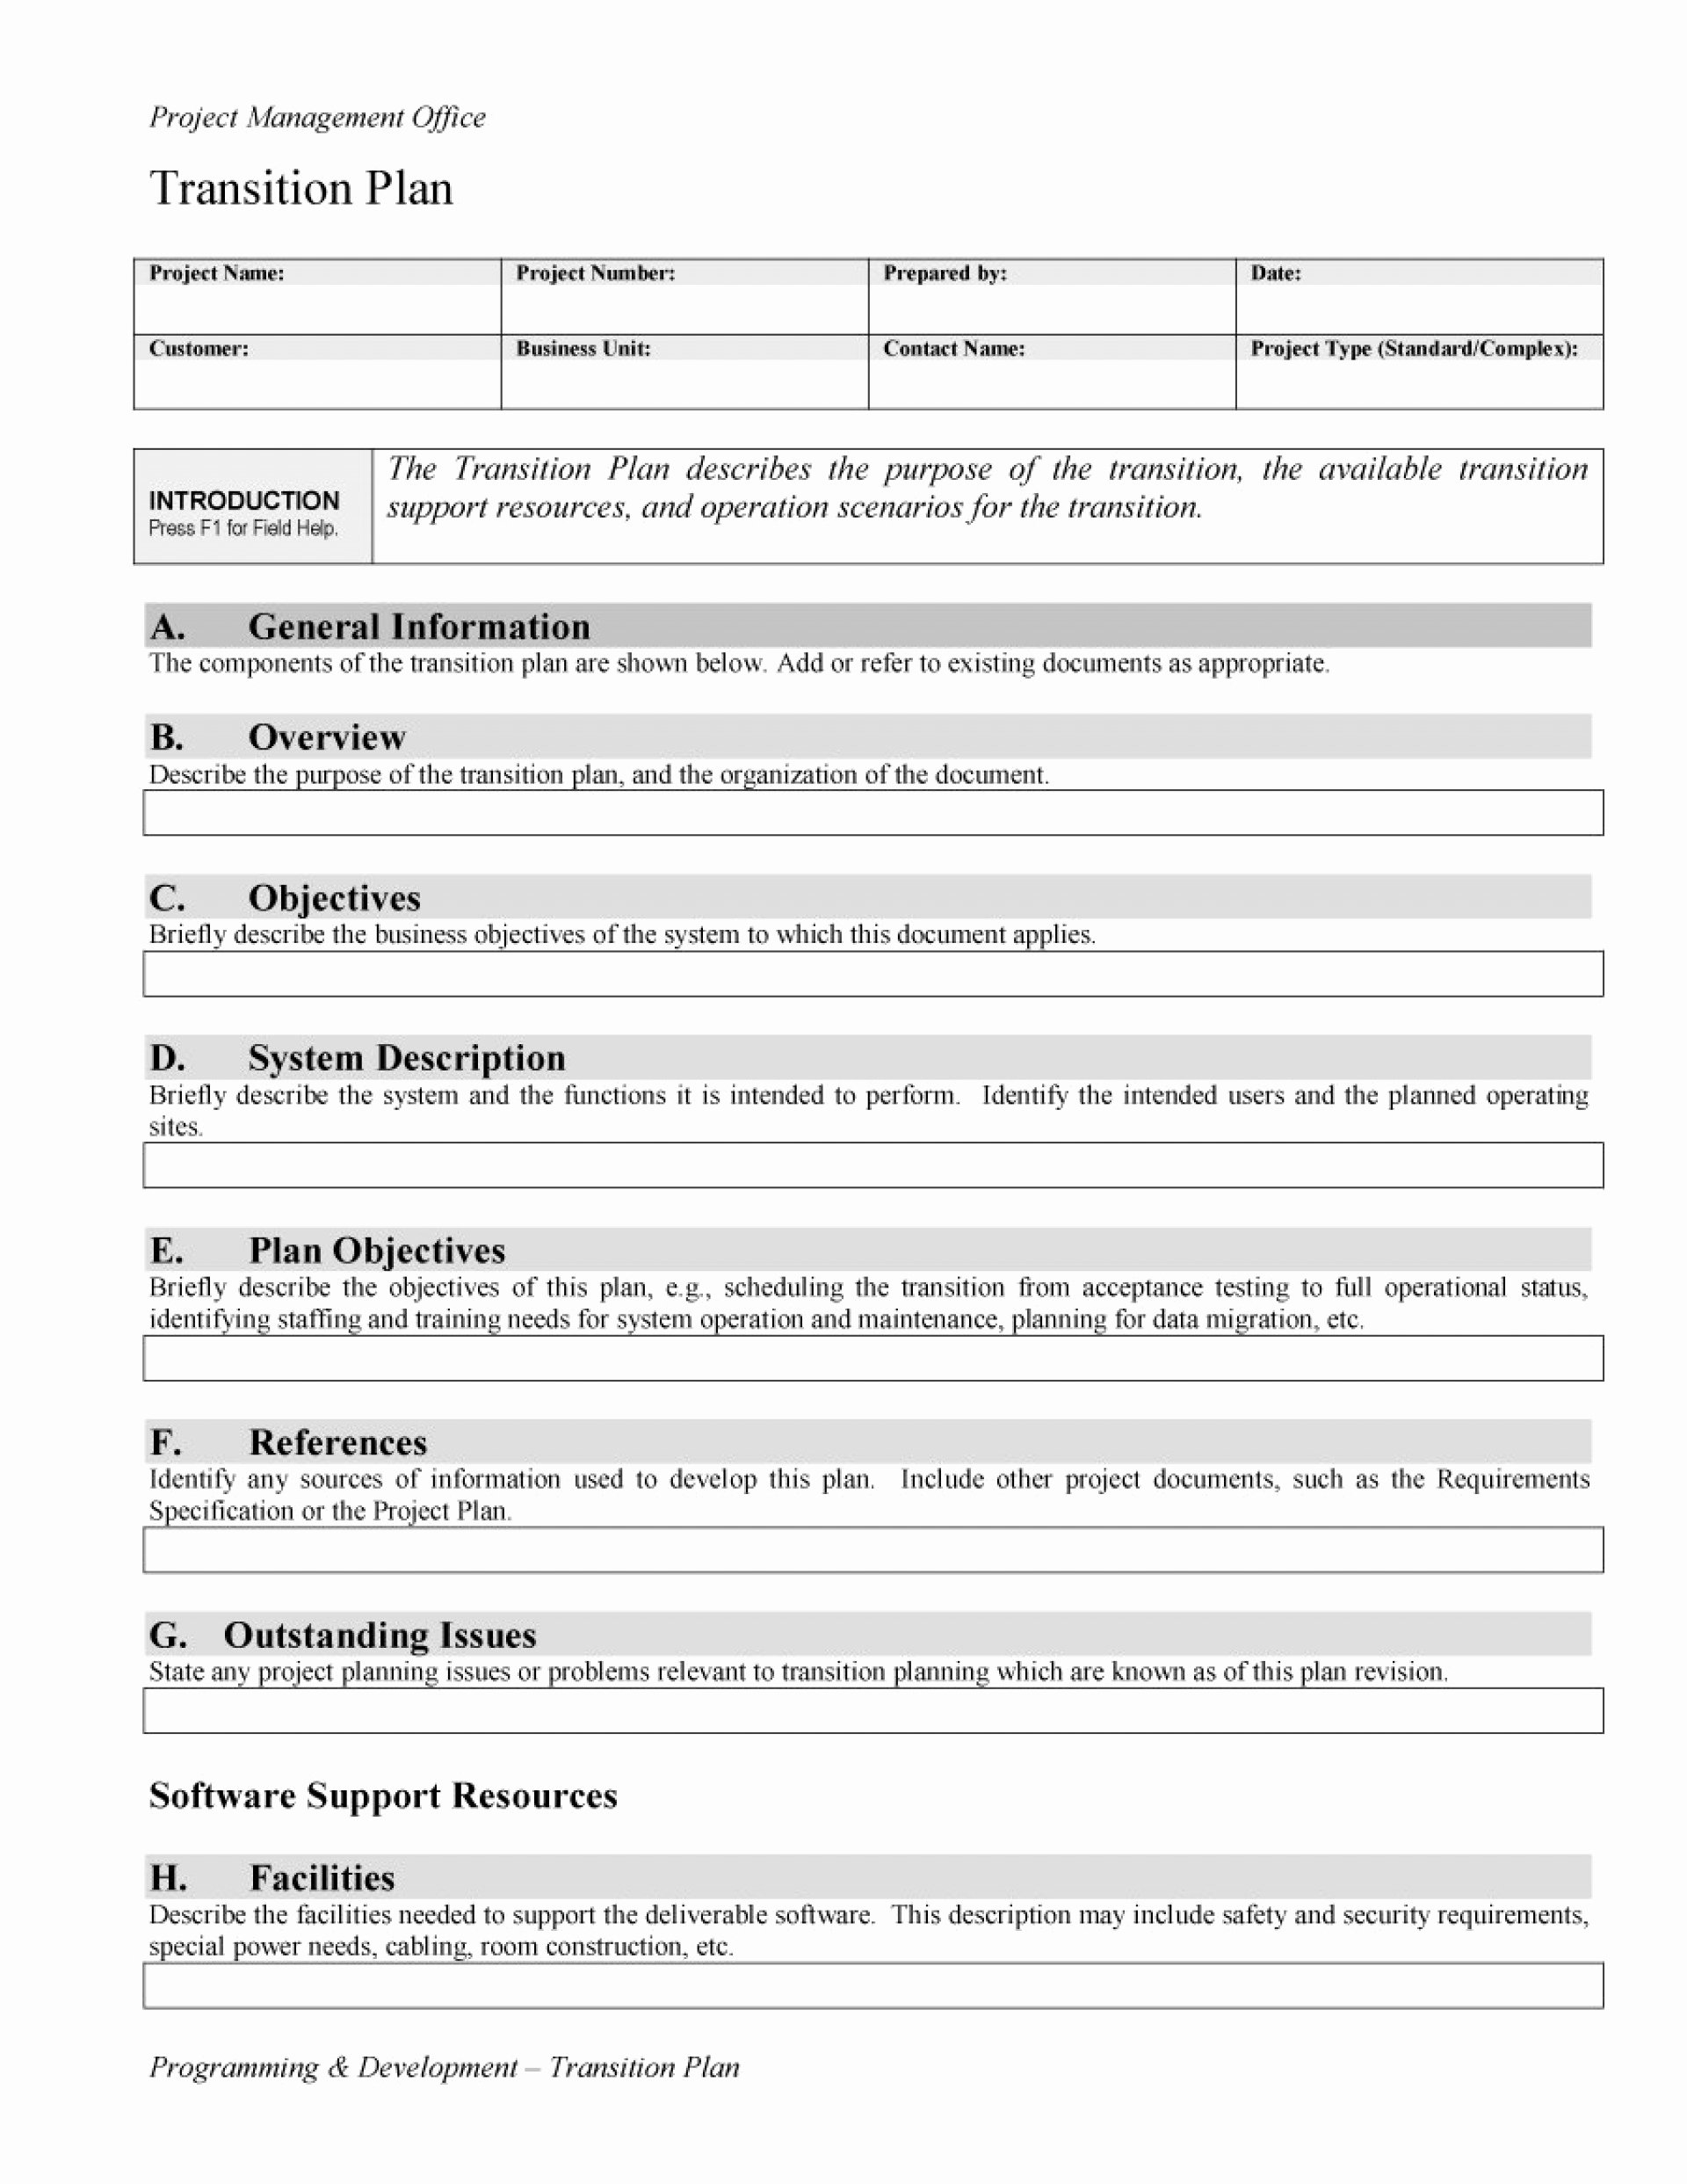 Business Transition Plan Template New 011 Business Transition Plan Template Tinypetition